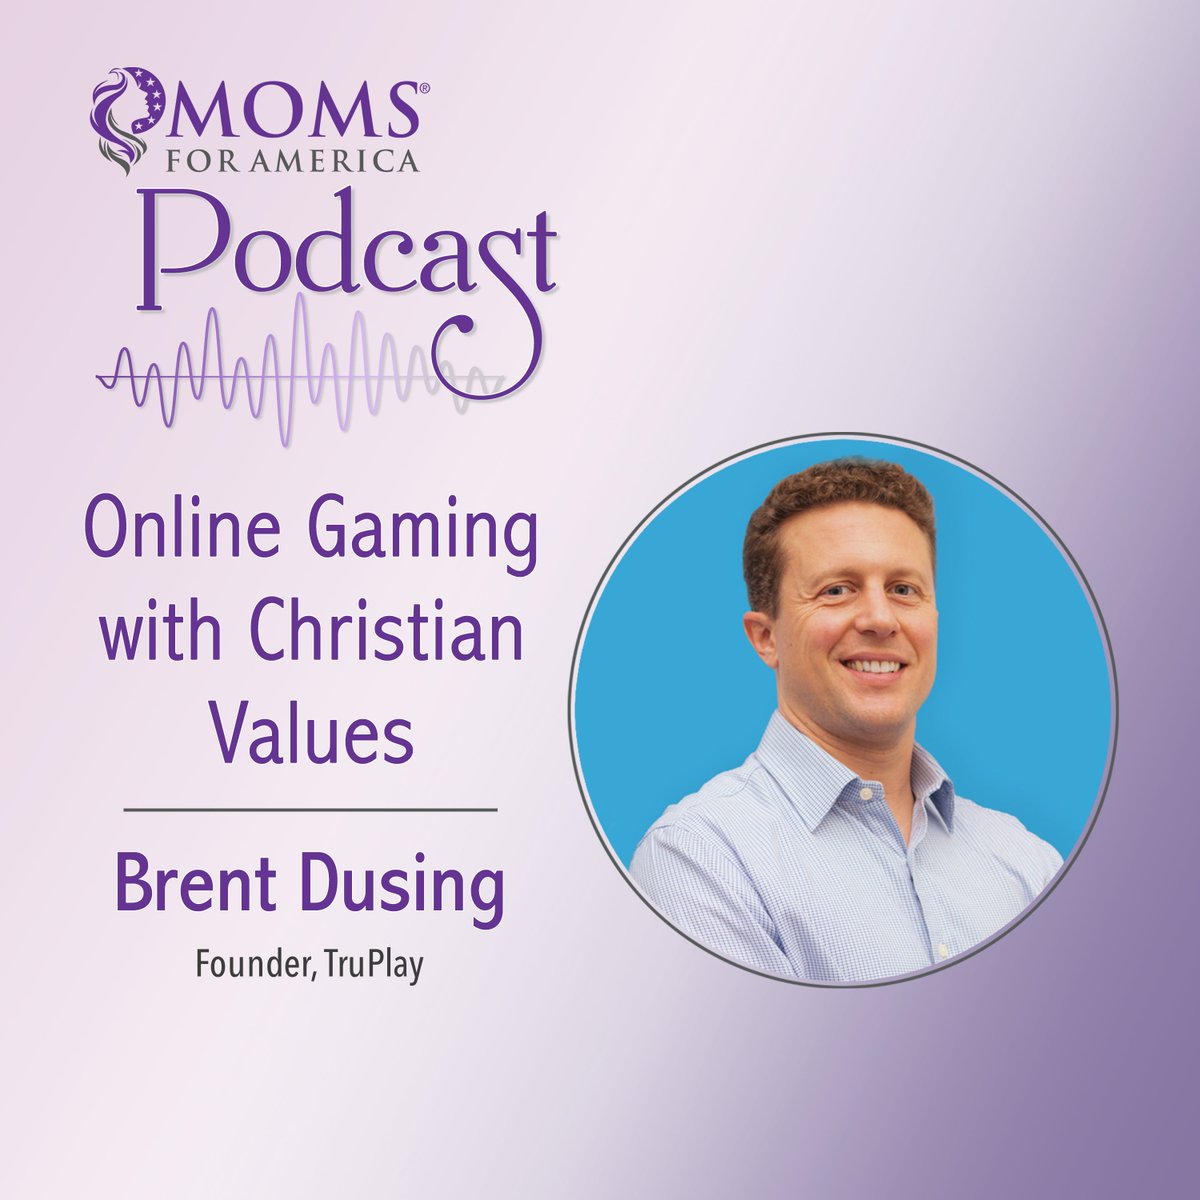 This week's 🎙️ 'Online Gaming with Christian Values' with Brent Dusing @TruPlayGames Listen & share👇 momsforamerica.us/podcasts/ #podcast #momsforamerica #GamingCommunity